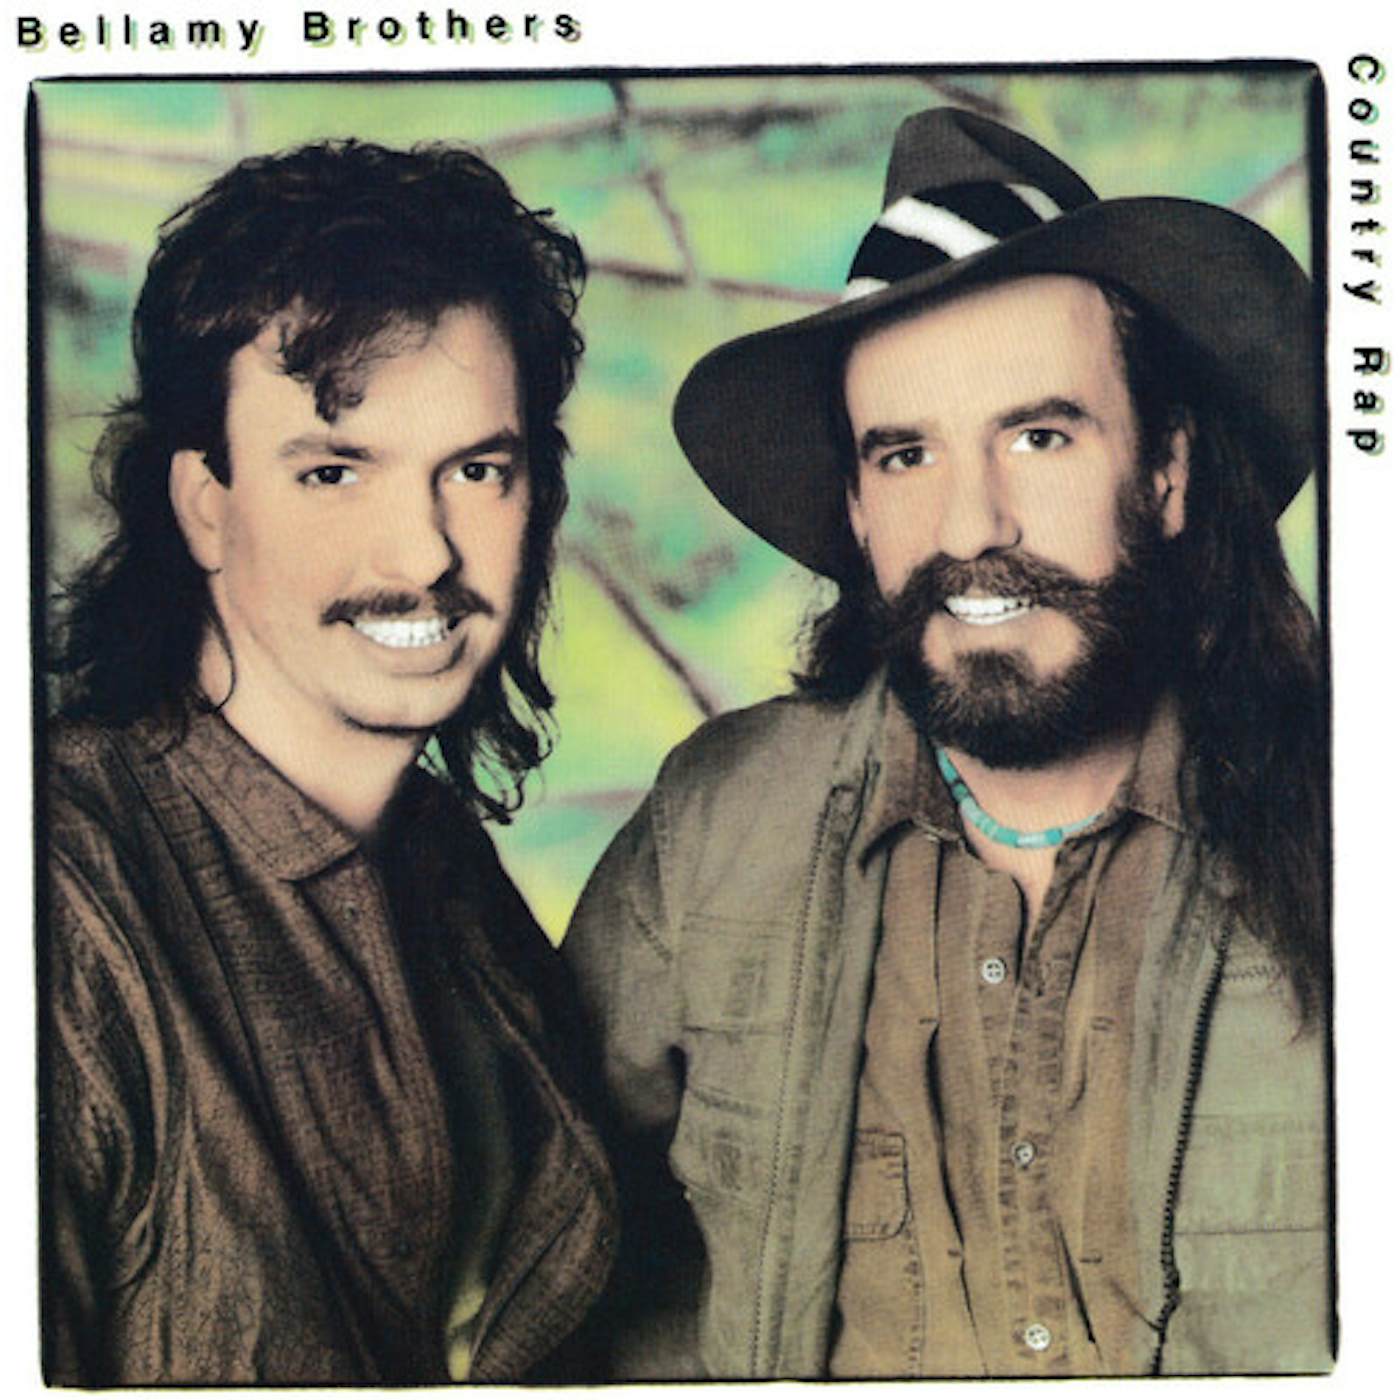 The Bellamy Brothers COUNTRY RAP CD